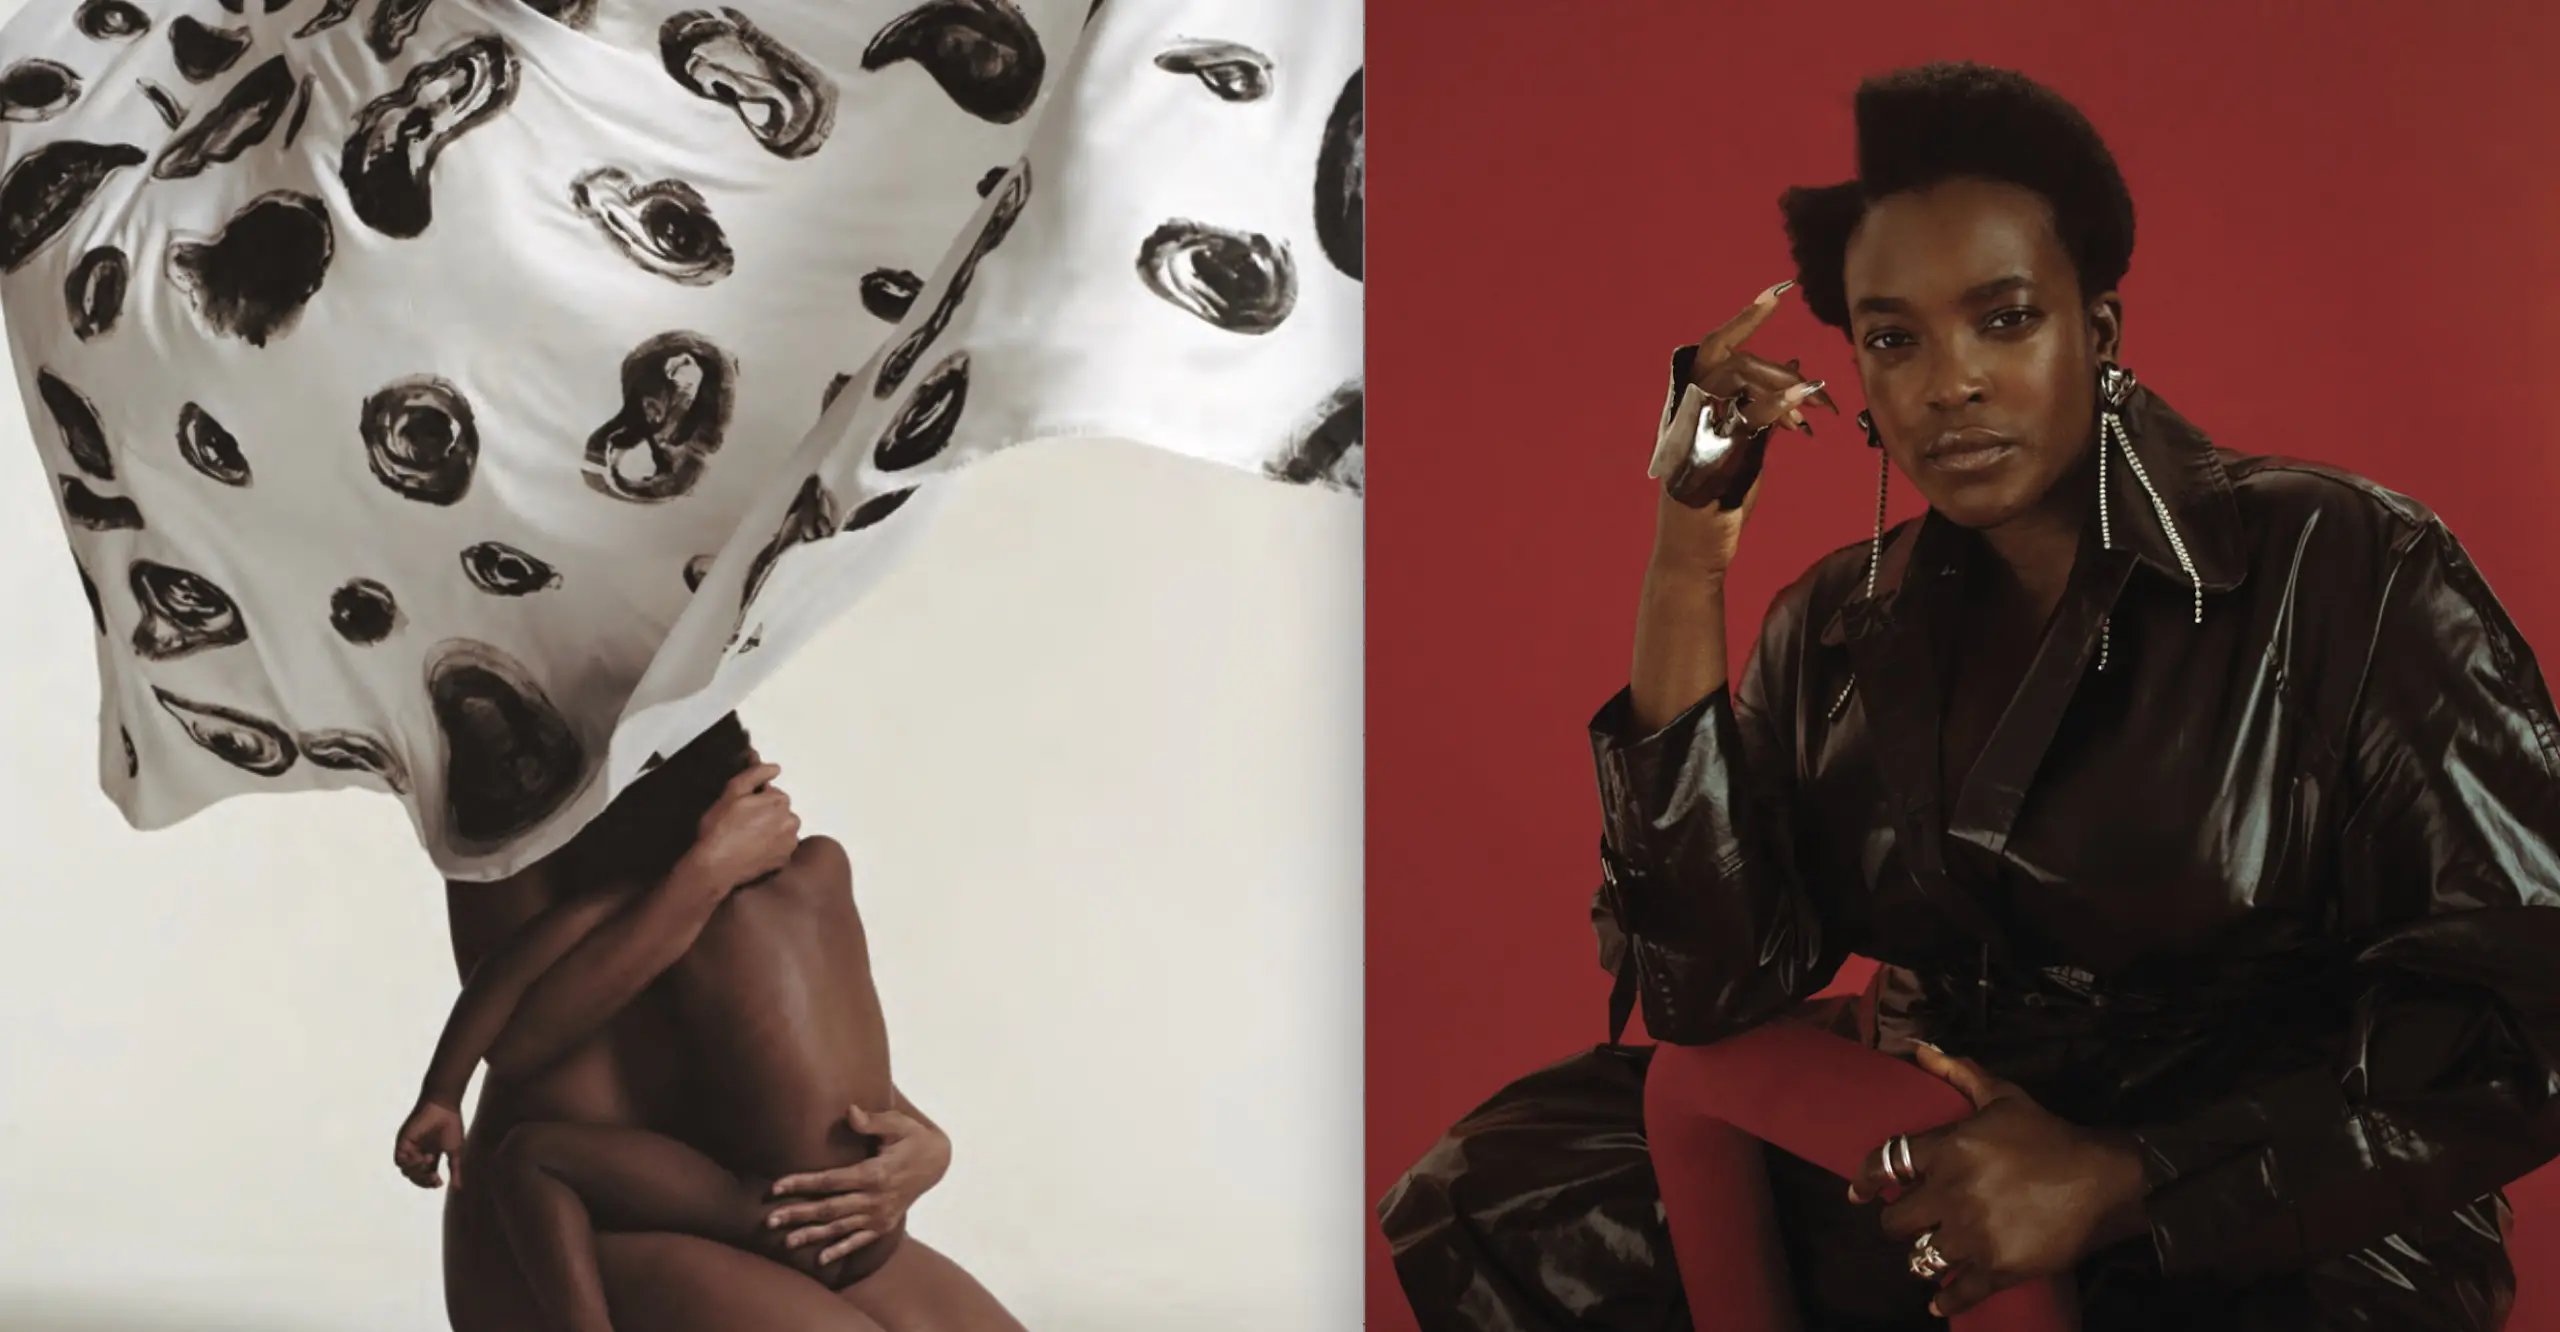 Two images: (1) portrait of a black figure holding a baby with a white material ballooned over the face; (2) portrait with red background wearing a leather coat